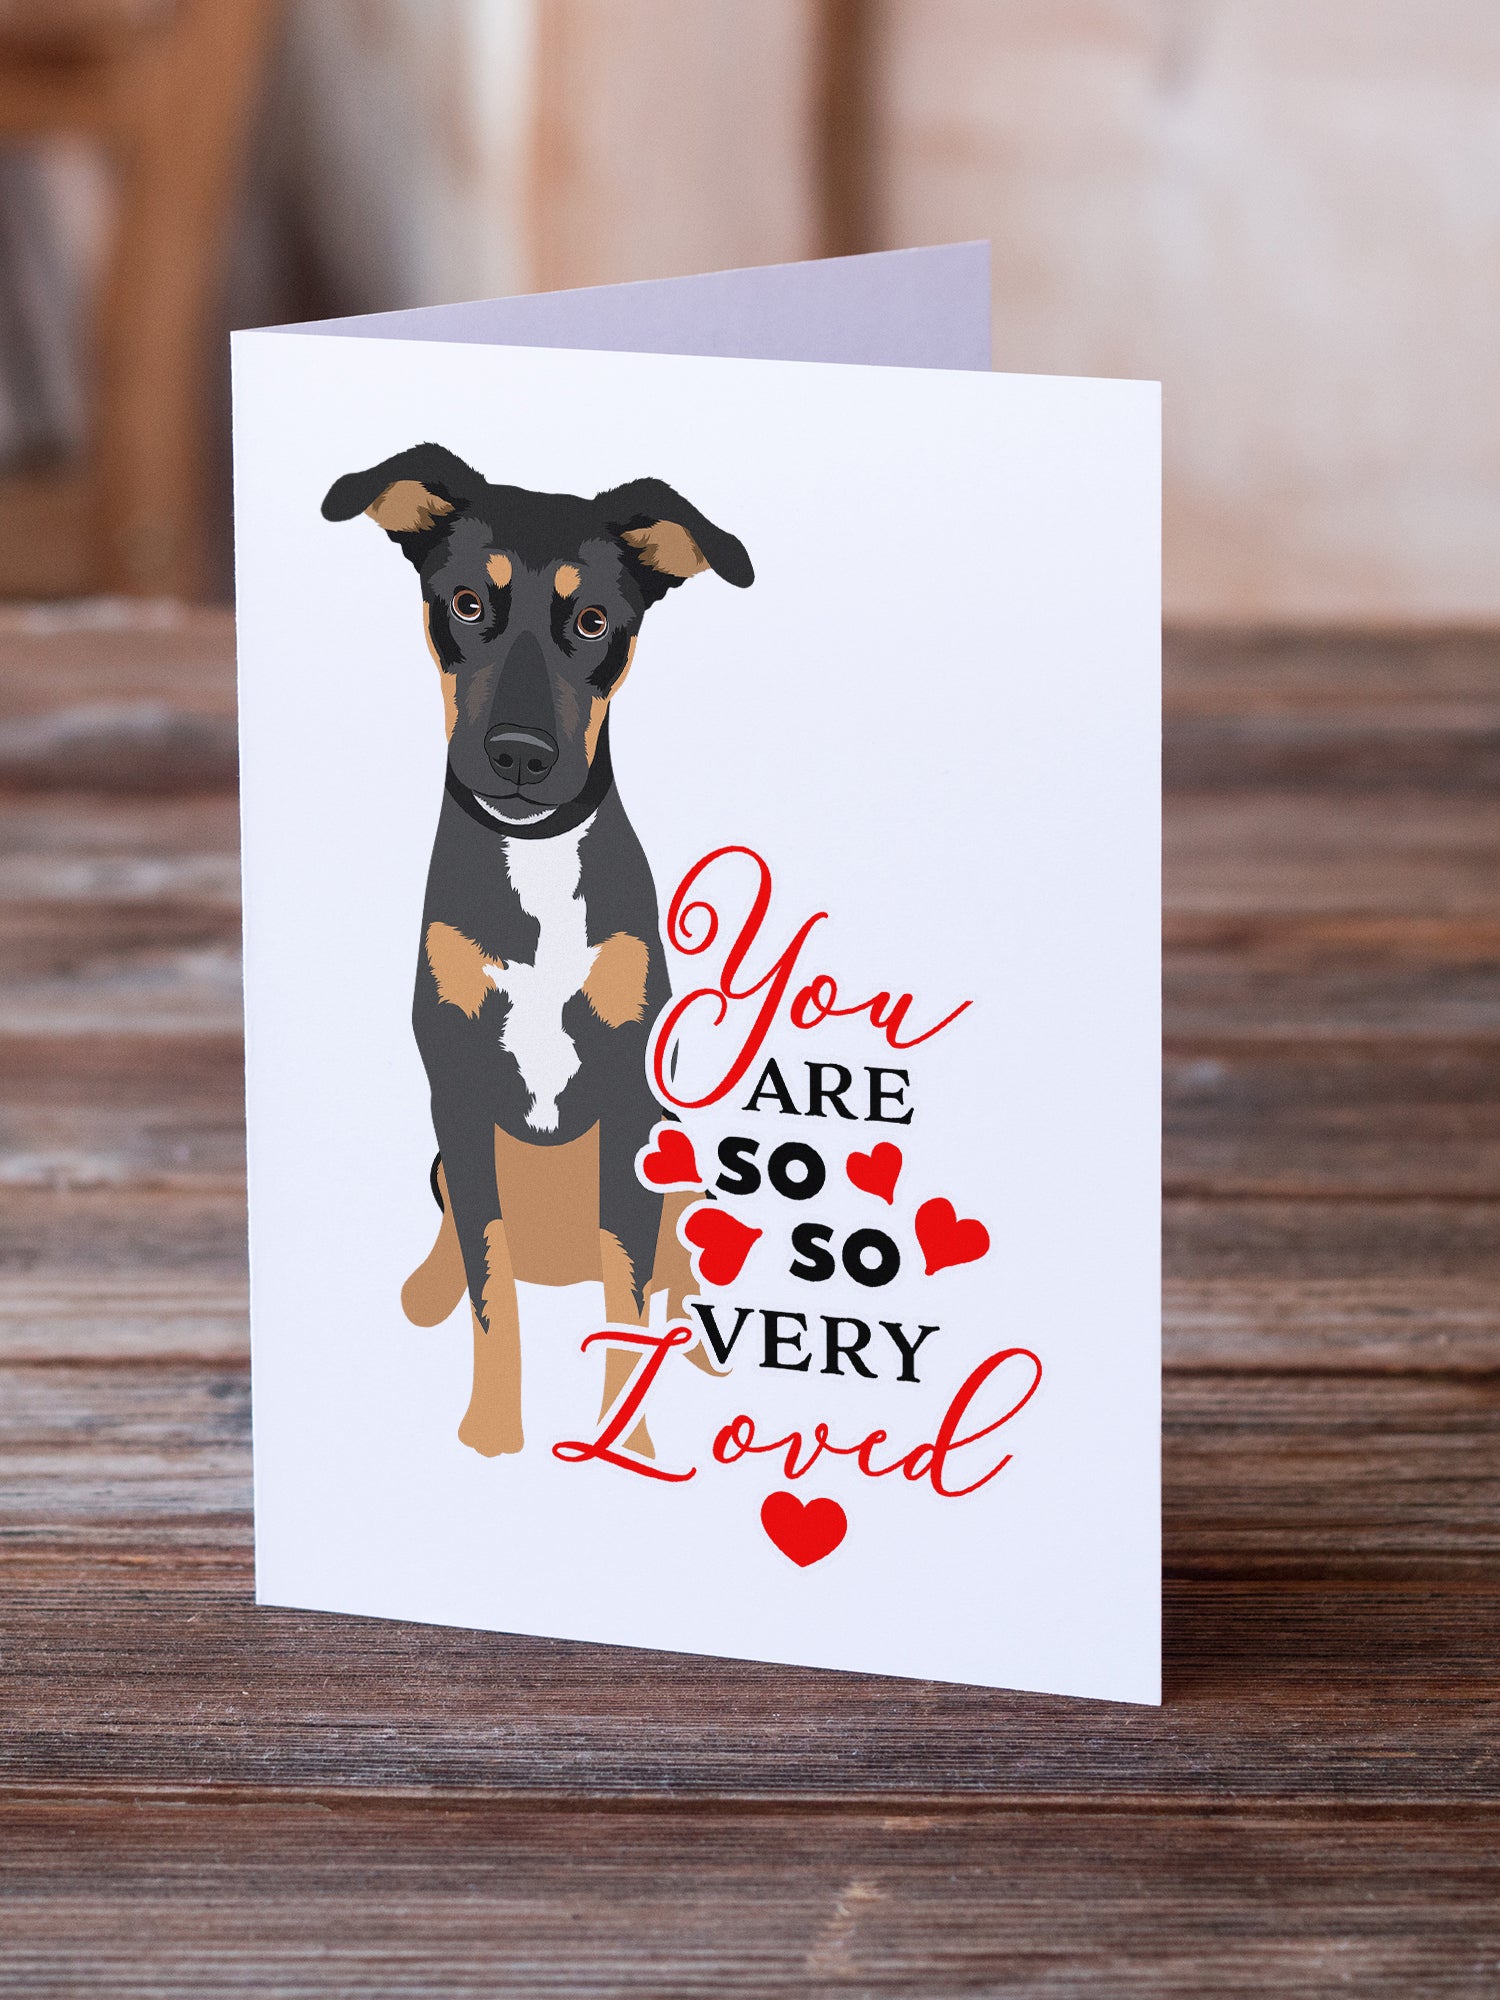 Rottweiler Black and Tan #6 so Loved Greeting Cards and Envelopes Pack of 8 - the-store.com